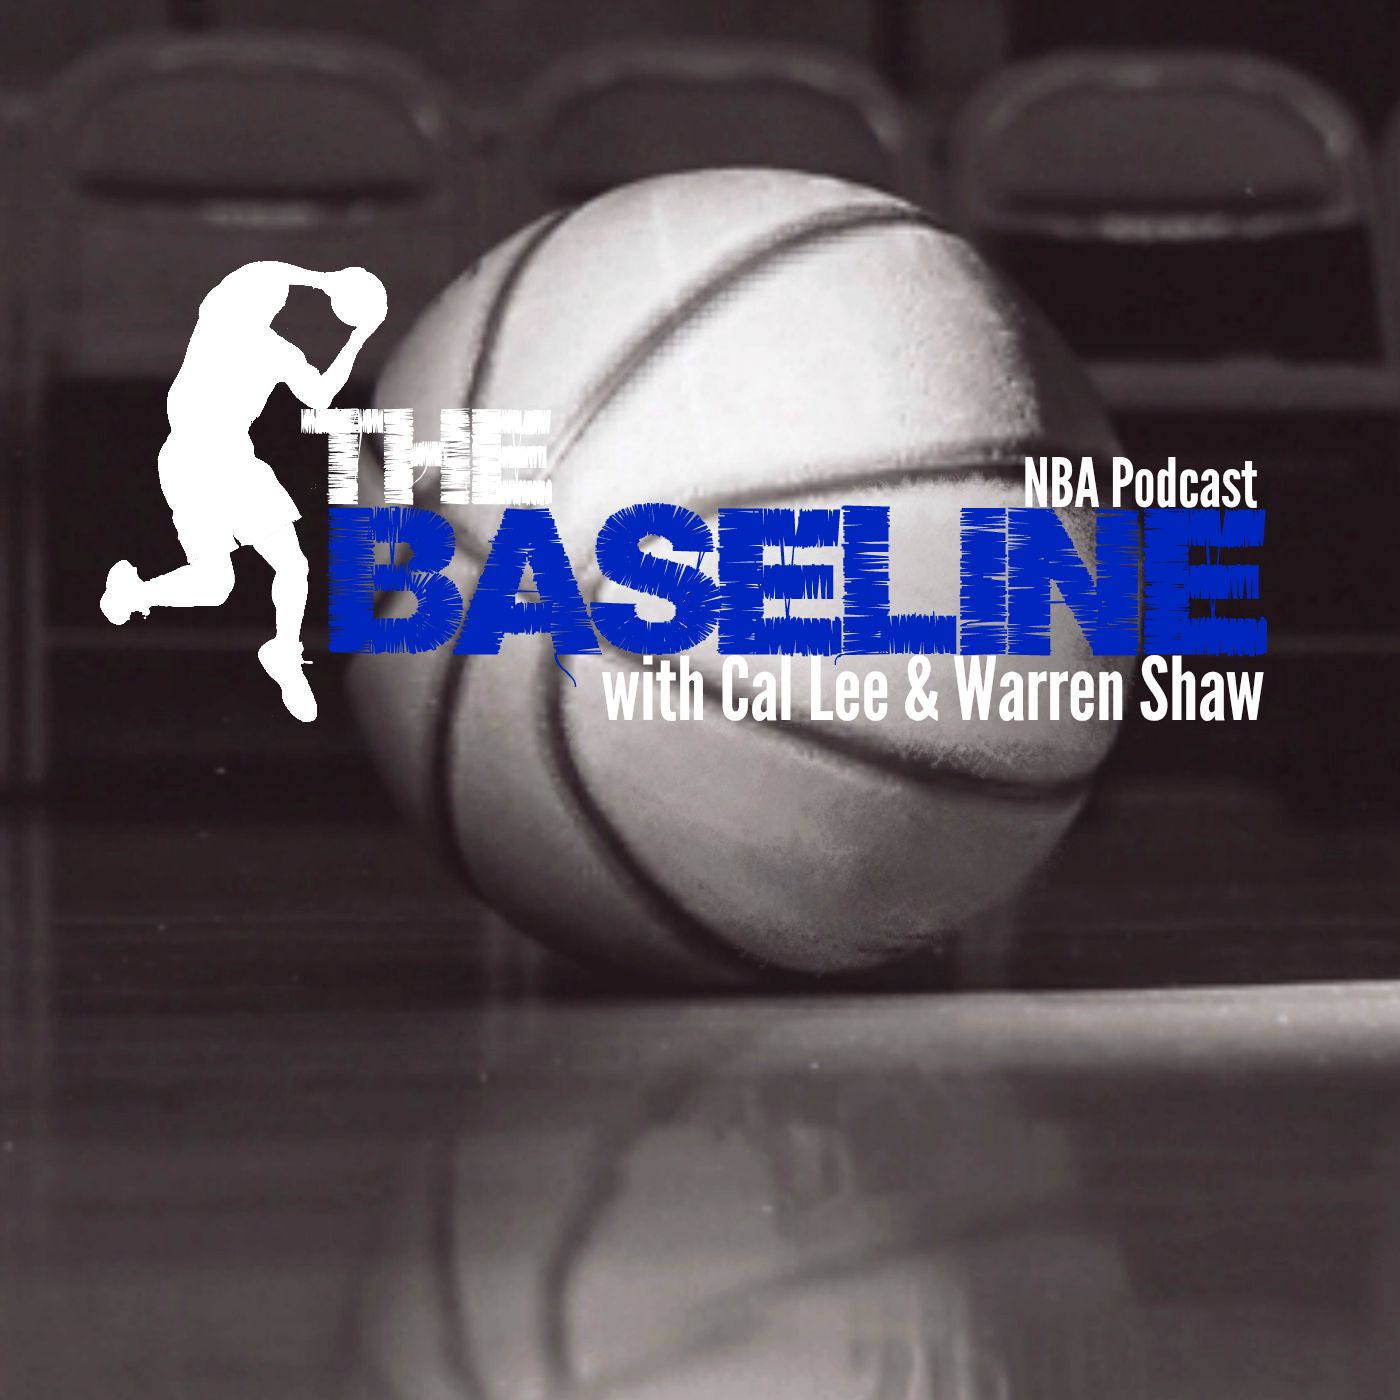 Ep 159| Blatt Dissed and Missed in Cleveland| Mid Season Awards | All Star Reserve Predicts